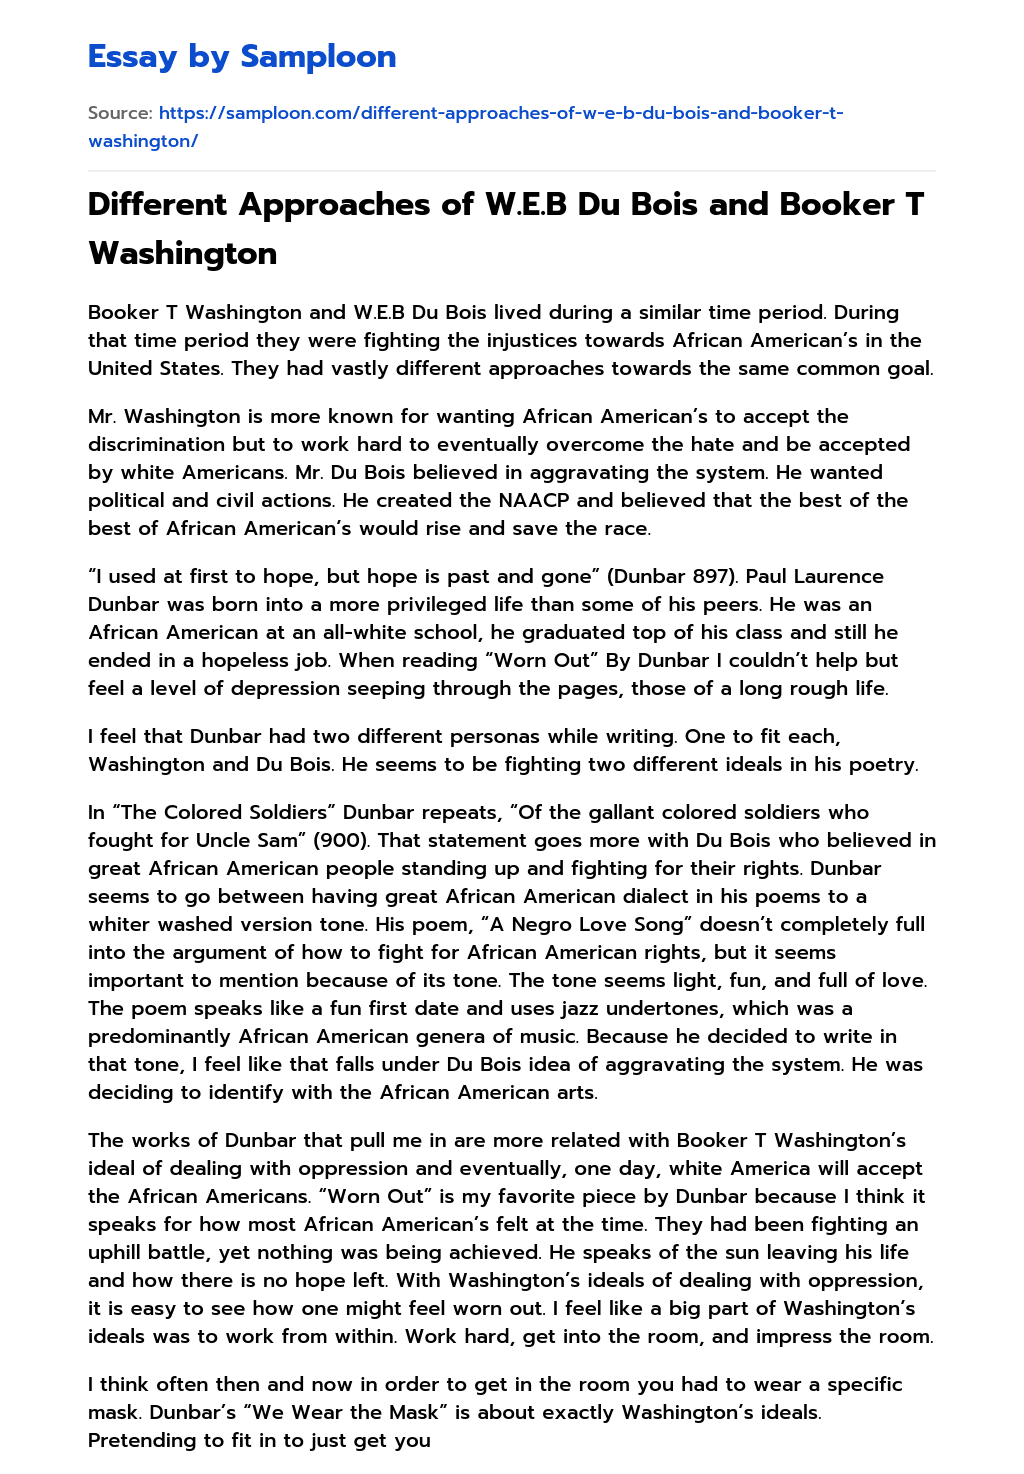 Different Approaches of W.E.B Du Bois and Booker T Washington essay